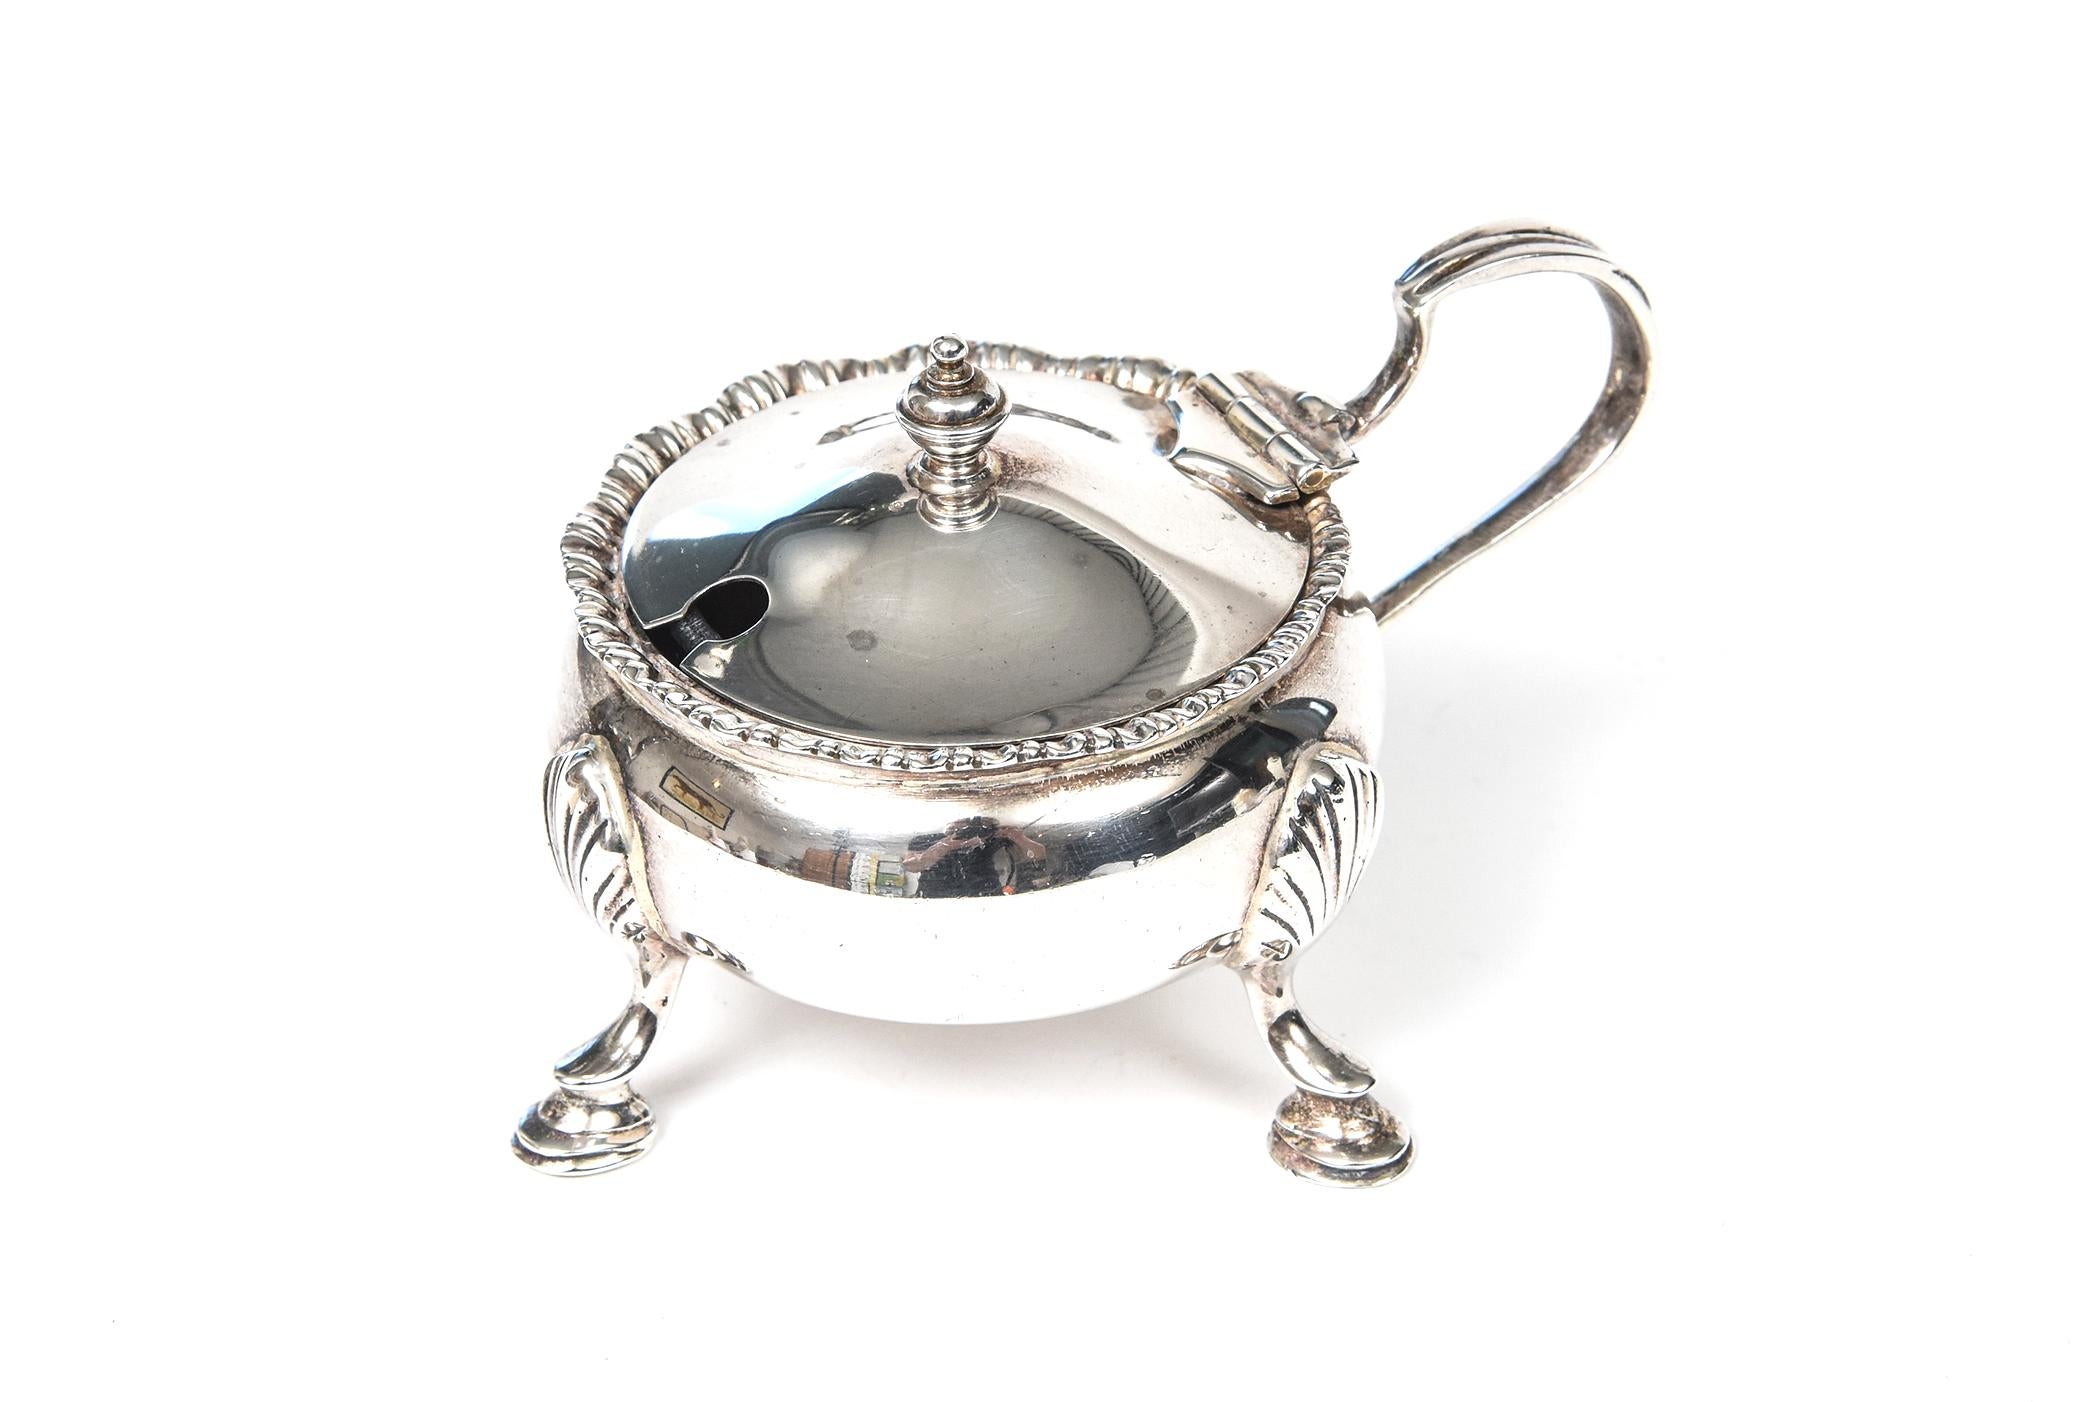 This beautiful ornate example of a mustard pot by famed Birmingham England silversmith Mappin and Webb was manufactured in 1929. The rim has a scolloped ribbon edge. It then bows out and sits on three ornate applied legs. It hinges open and has a